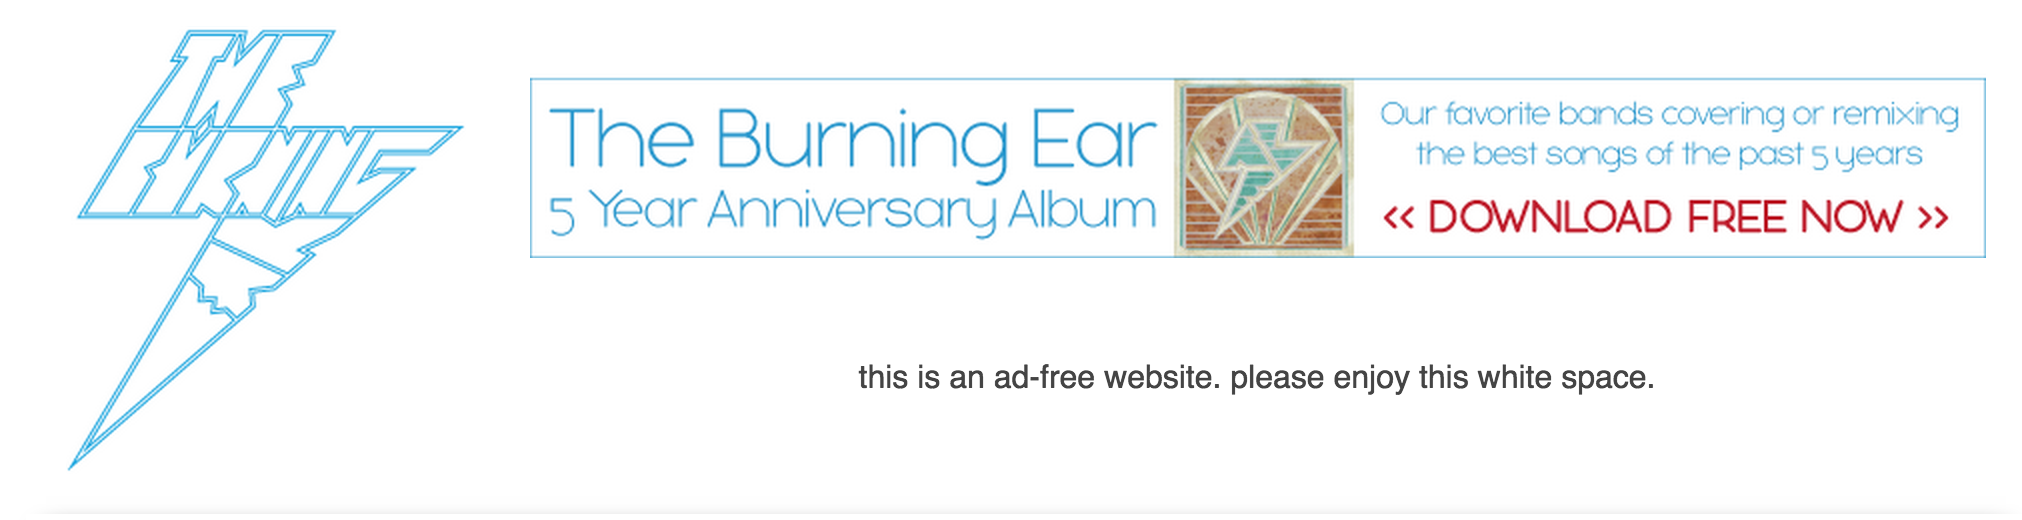 The burning ear homepage, This is an ad-free website. Please enjoy this white space.